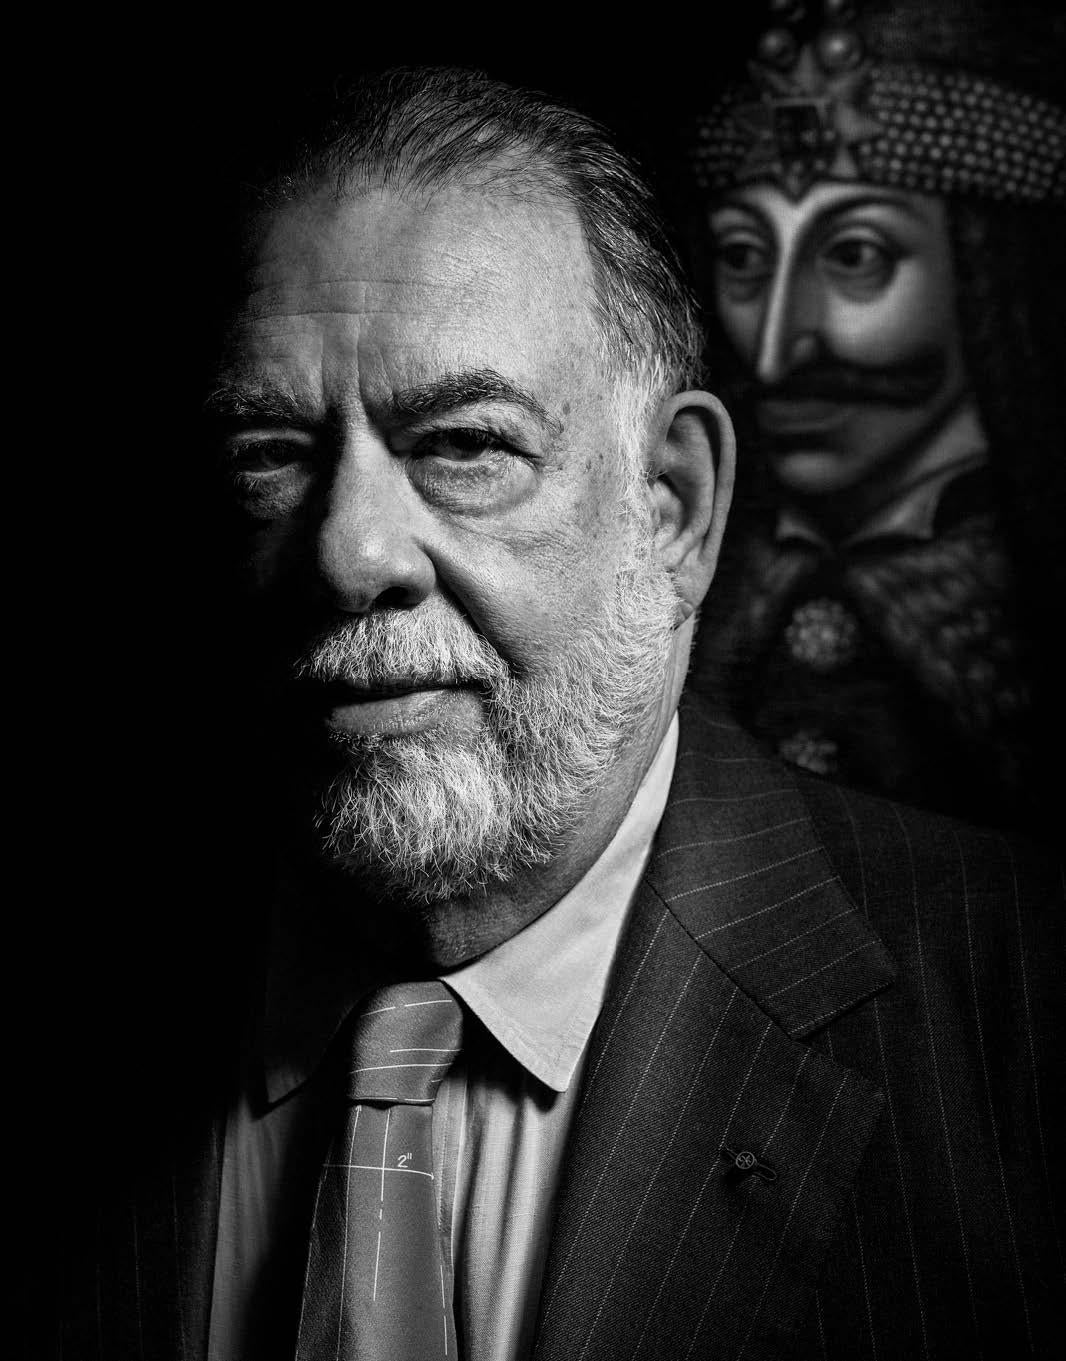 Greg Gorman Black and White Photograph - Francis Ford Coppola, Contemporary, Celebrity, Photography, Portrait